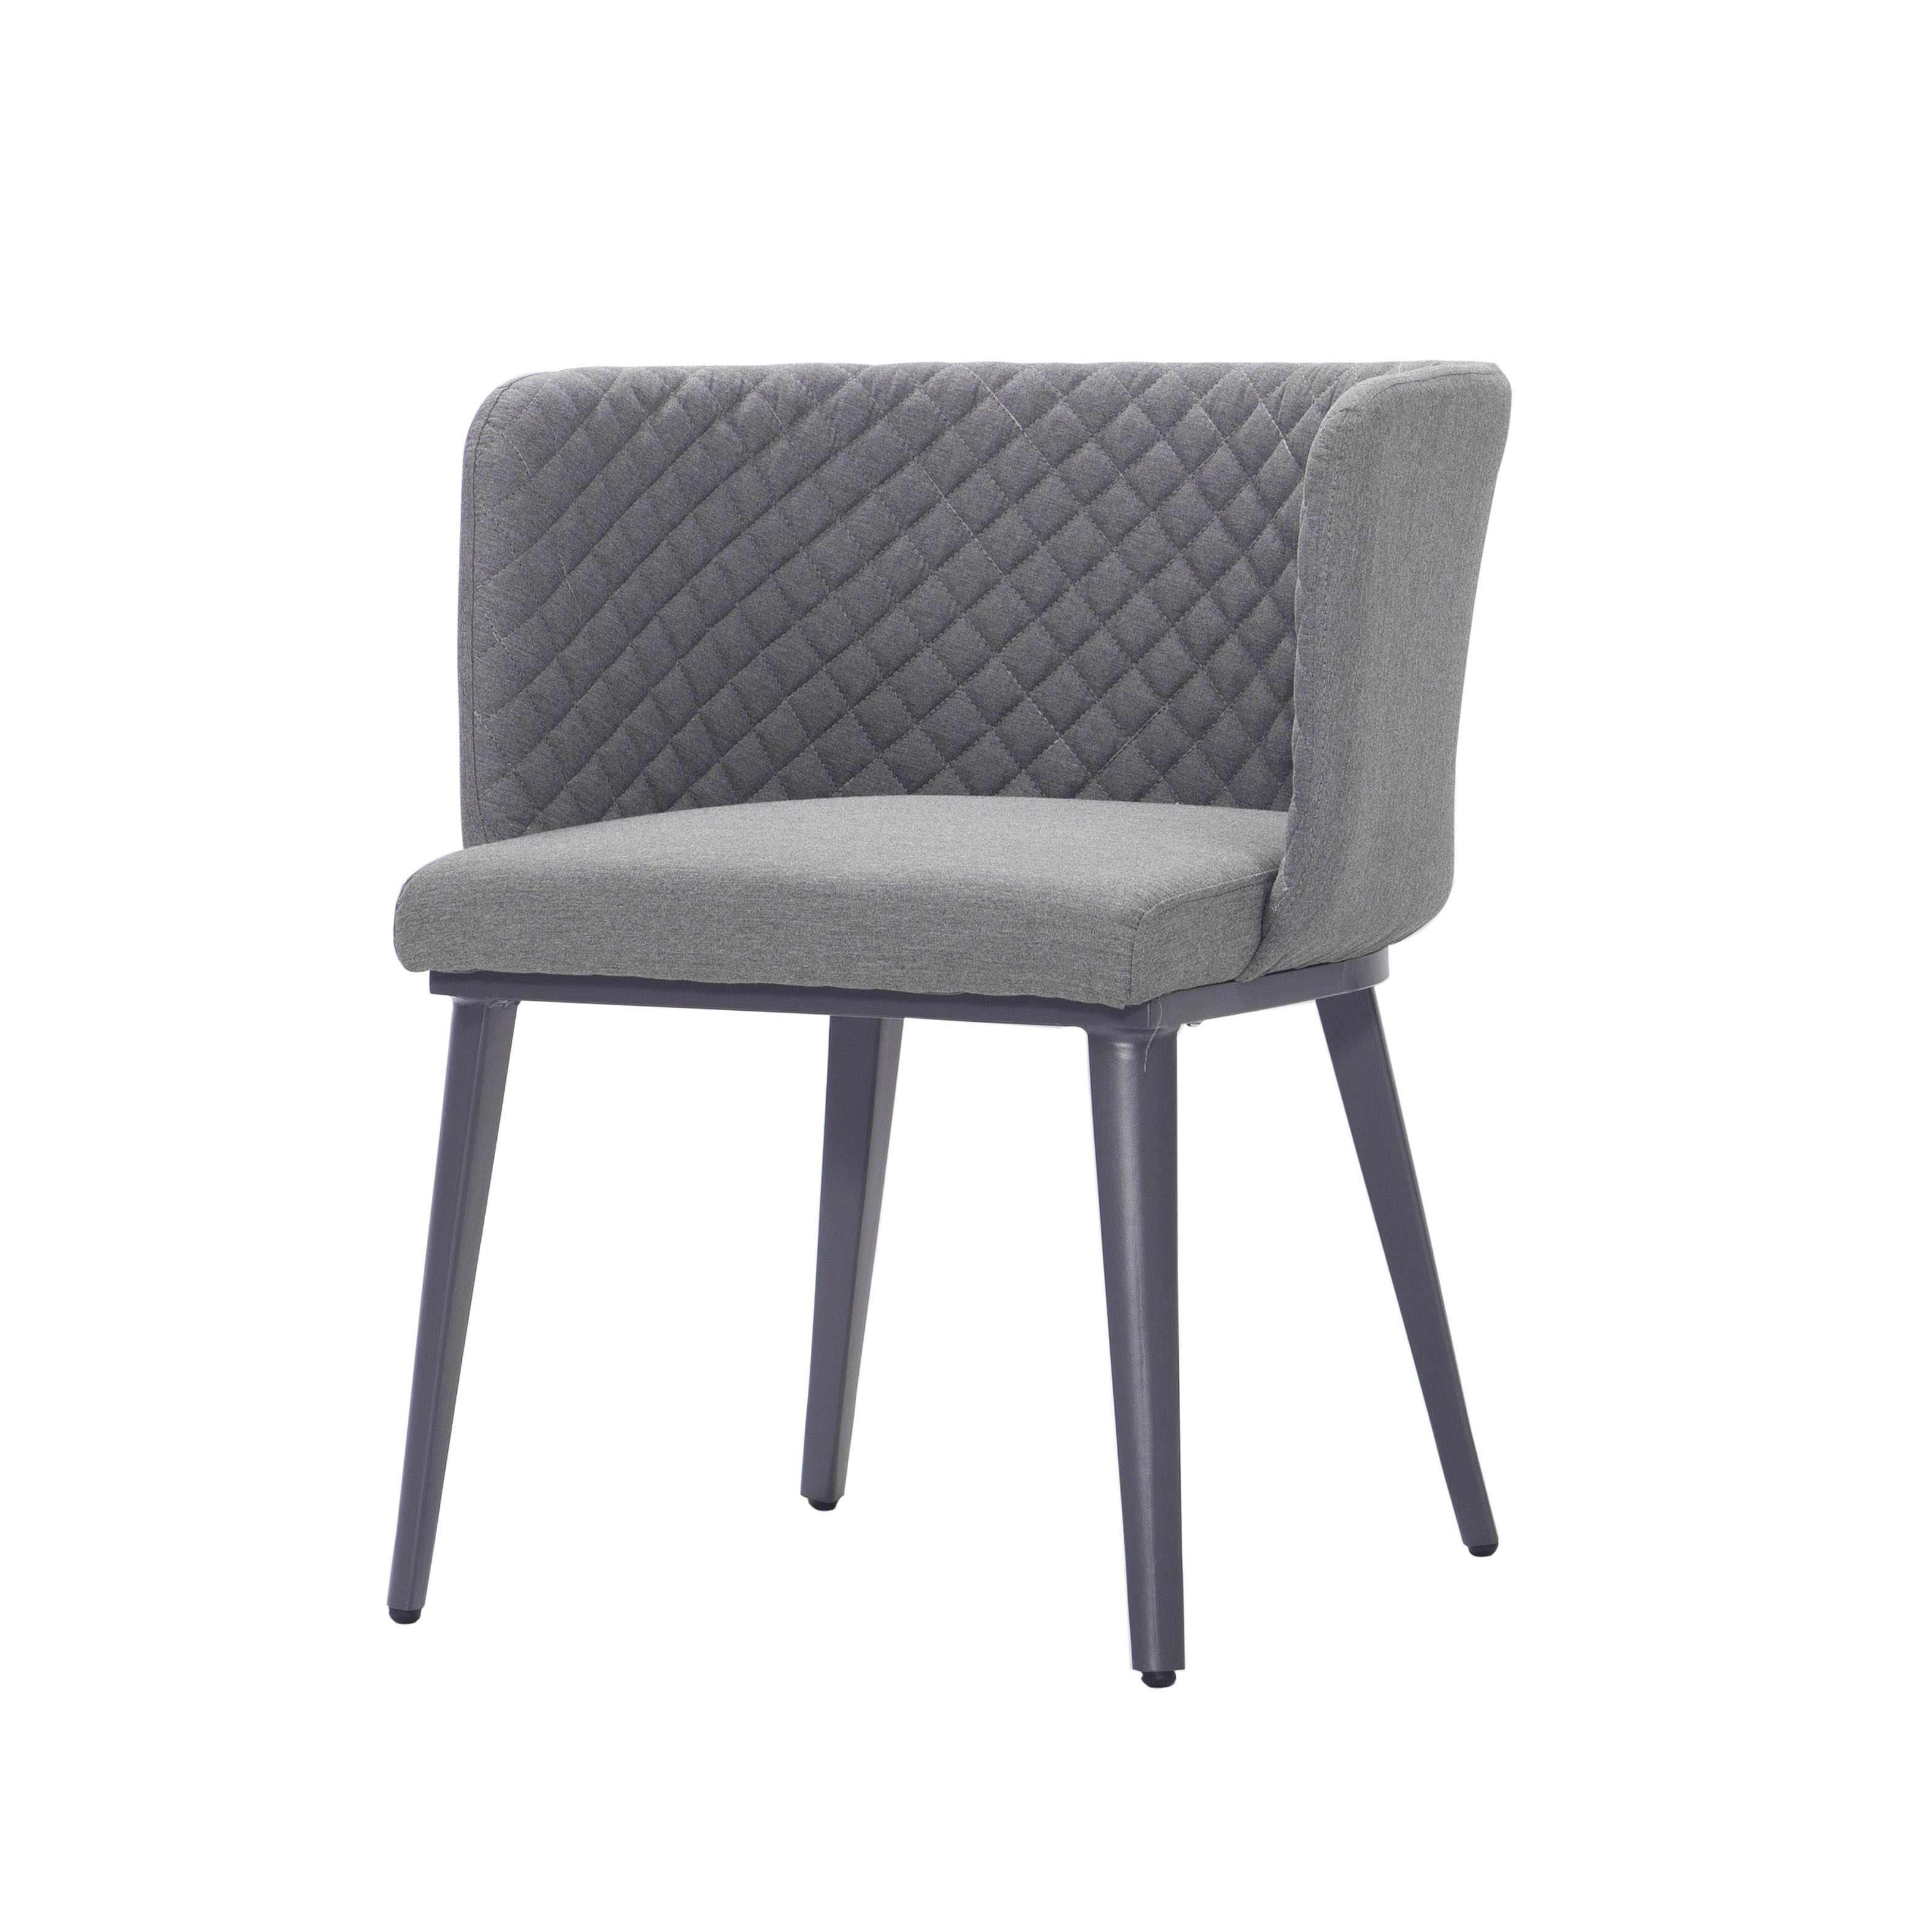 Winston dining chair S1